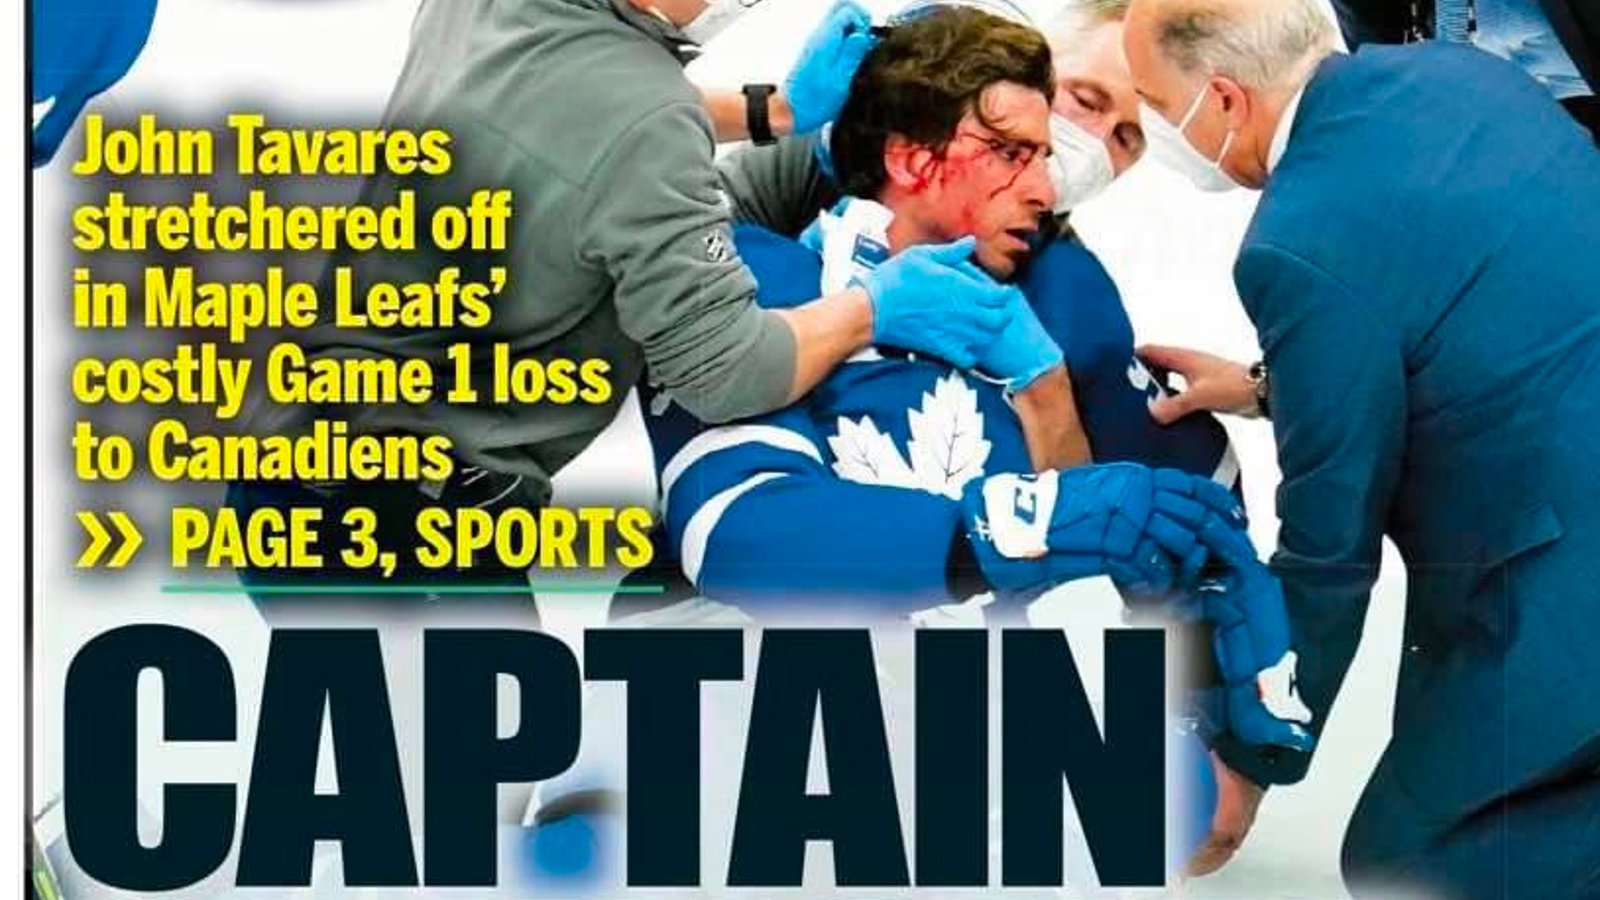 Toronto Sun and other medias in hot water over treatment of Tavares’ injury 